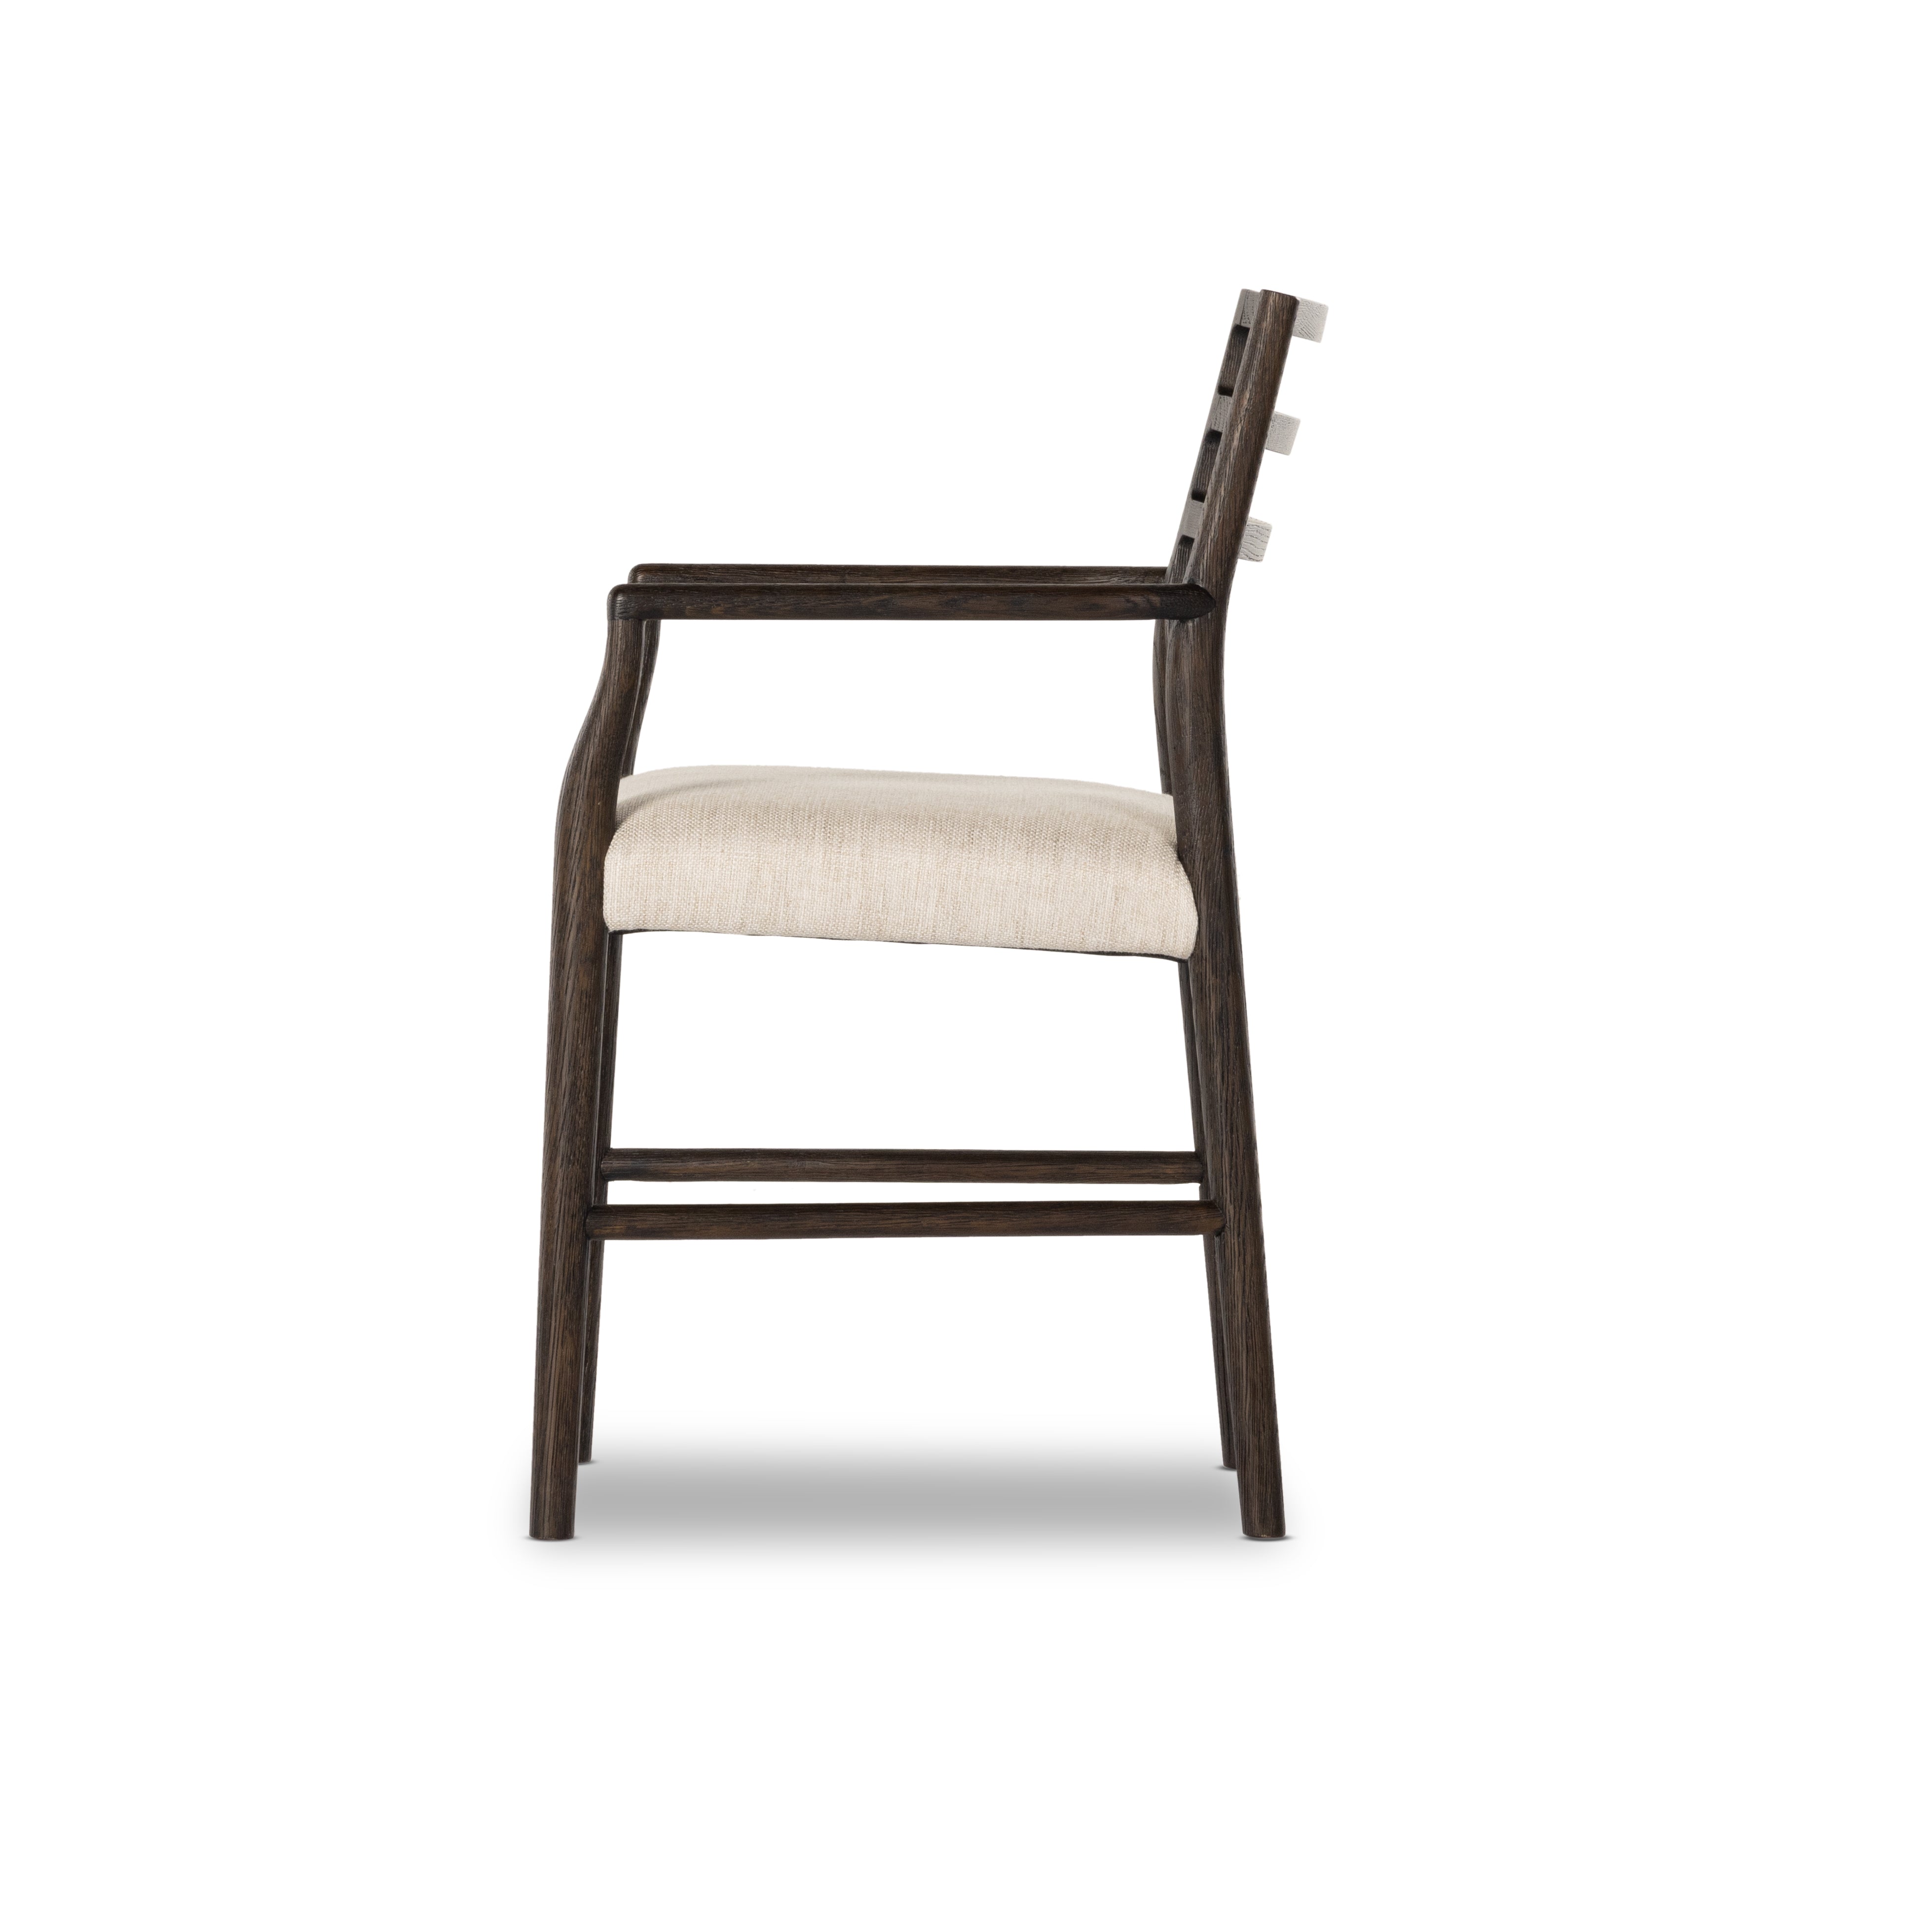 The classic ladderback chair, reimagined. Carbon-finished solid oak frames a squared cotton- and linen-blend seat, for a textural feel and comfortable sit. Amethyst Home provides interior design, new construction, custom furniture, and area rugs in the Park City metro area.